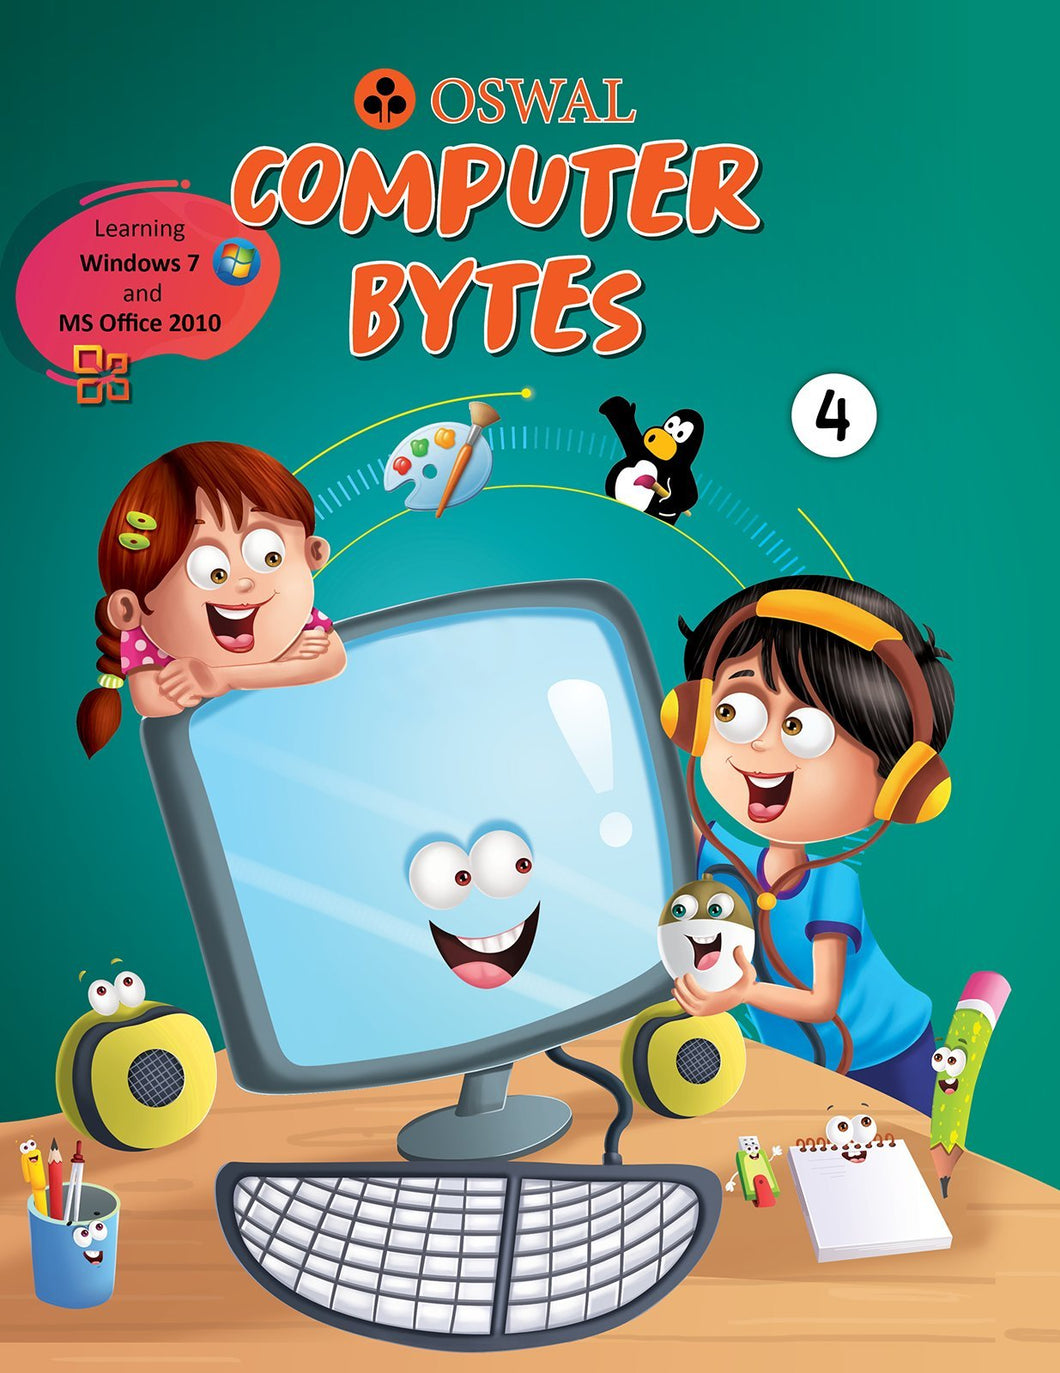 Oswal Computer Bytes: Textbook for CBSE Class 4